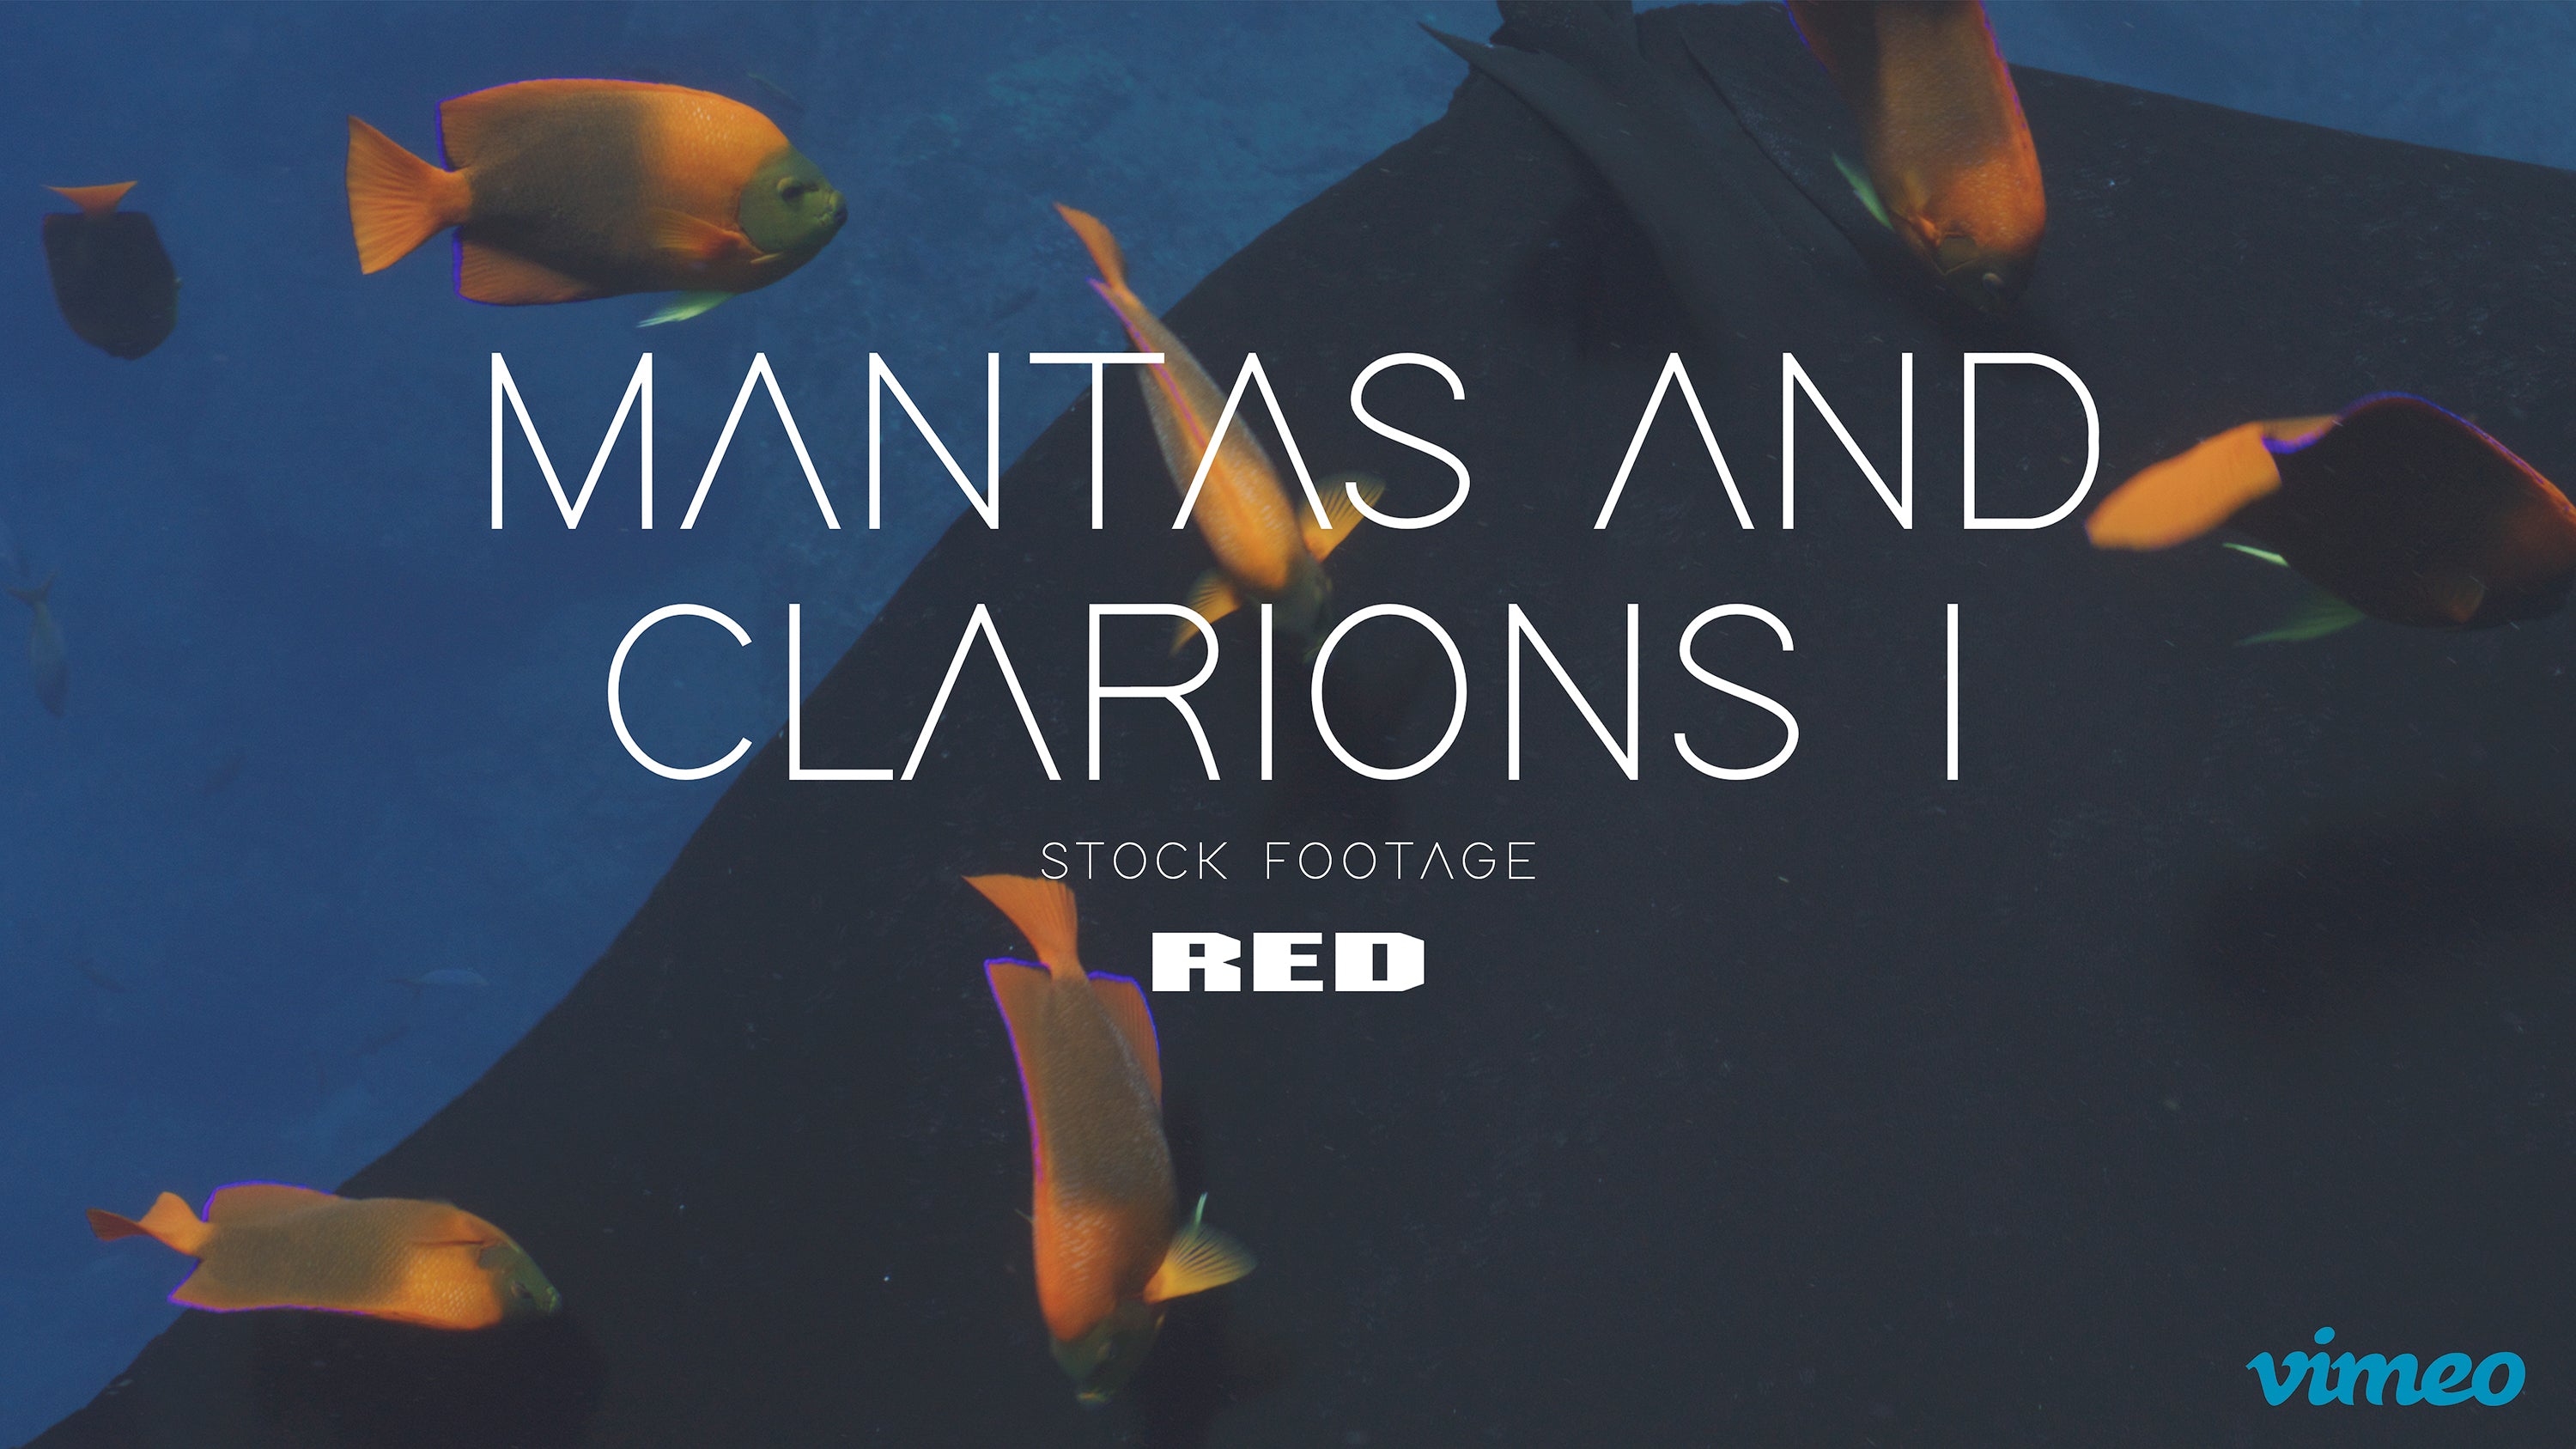 Mantas and clarions I